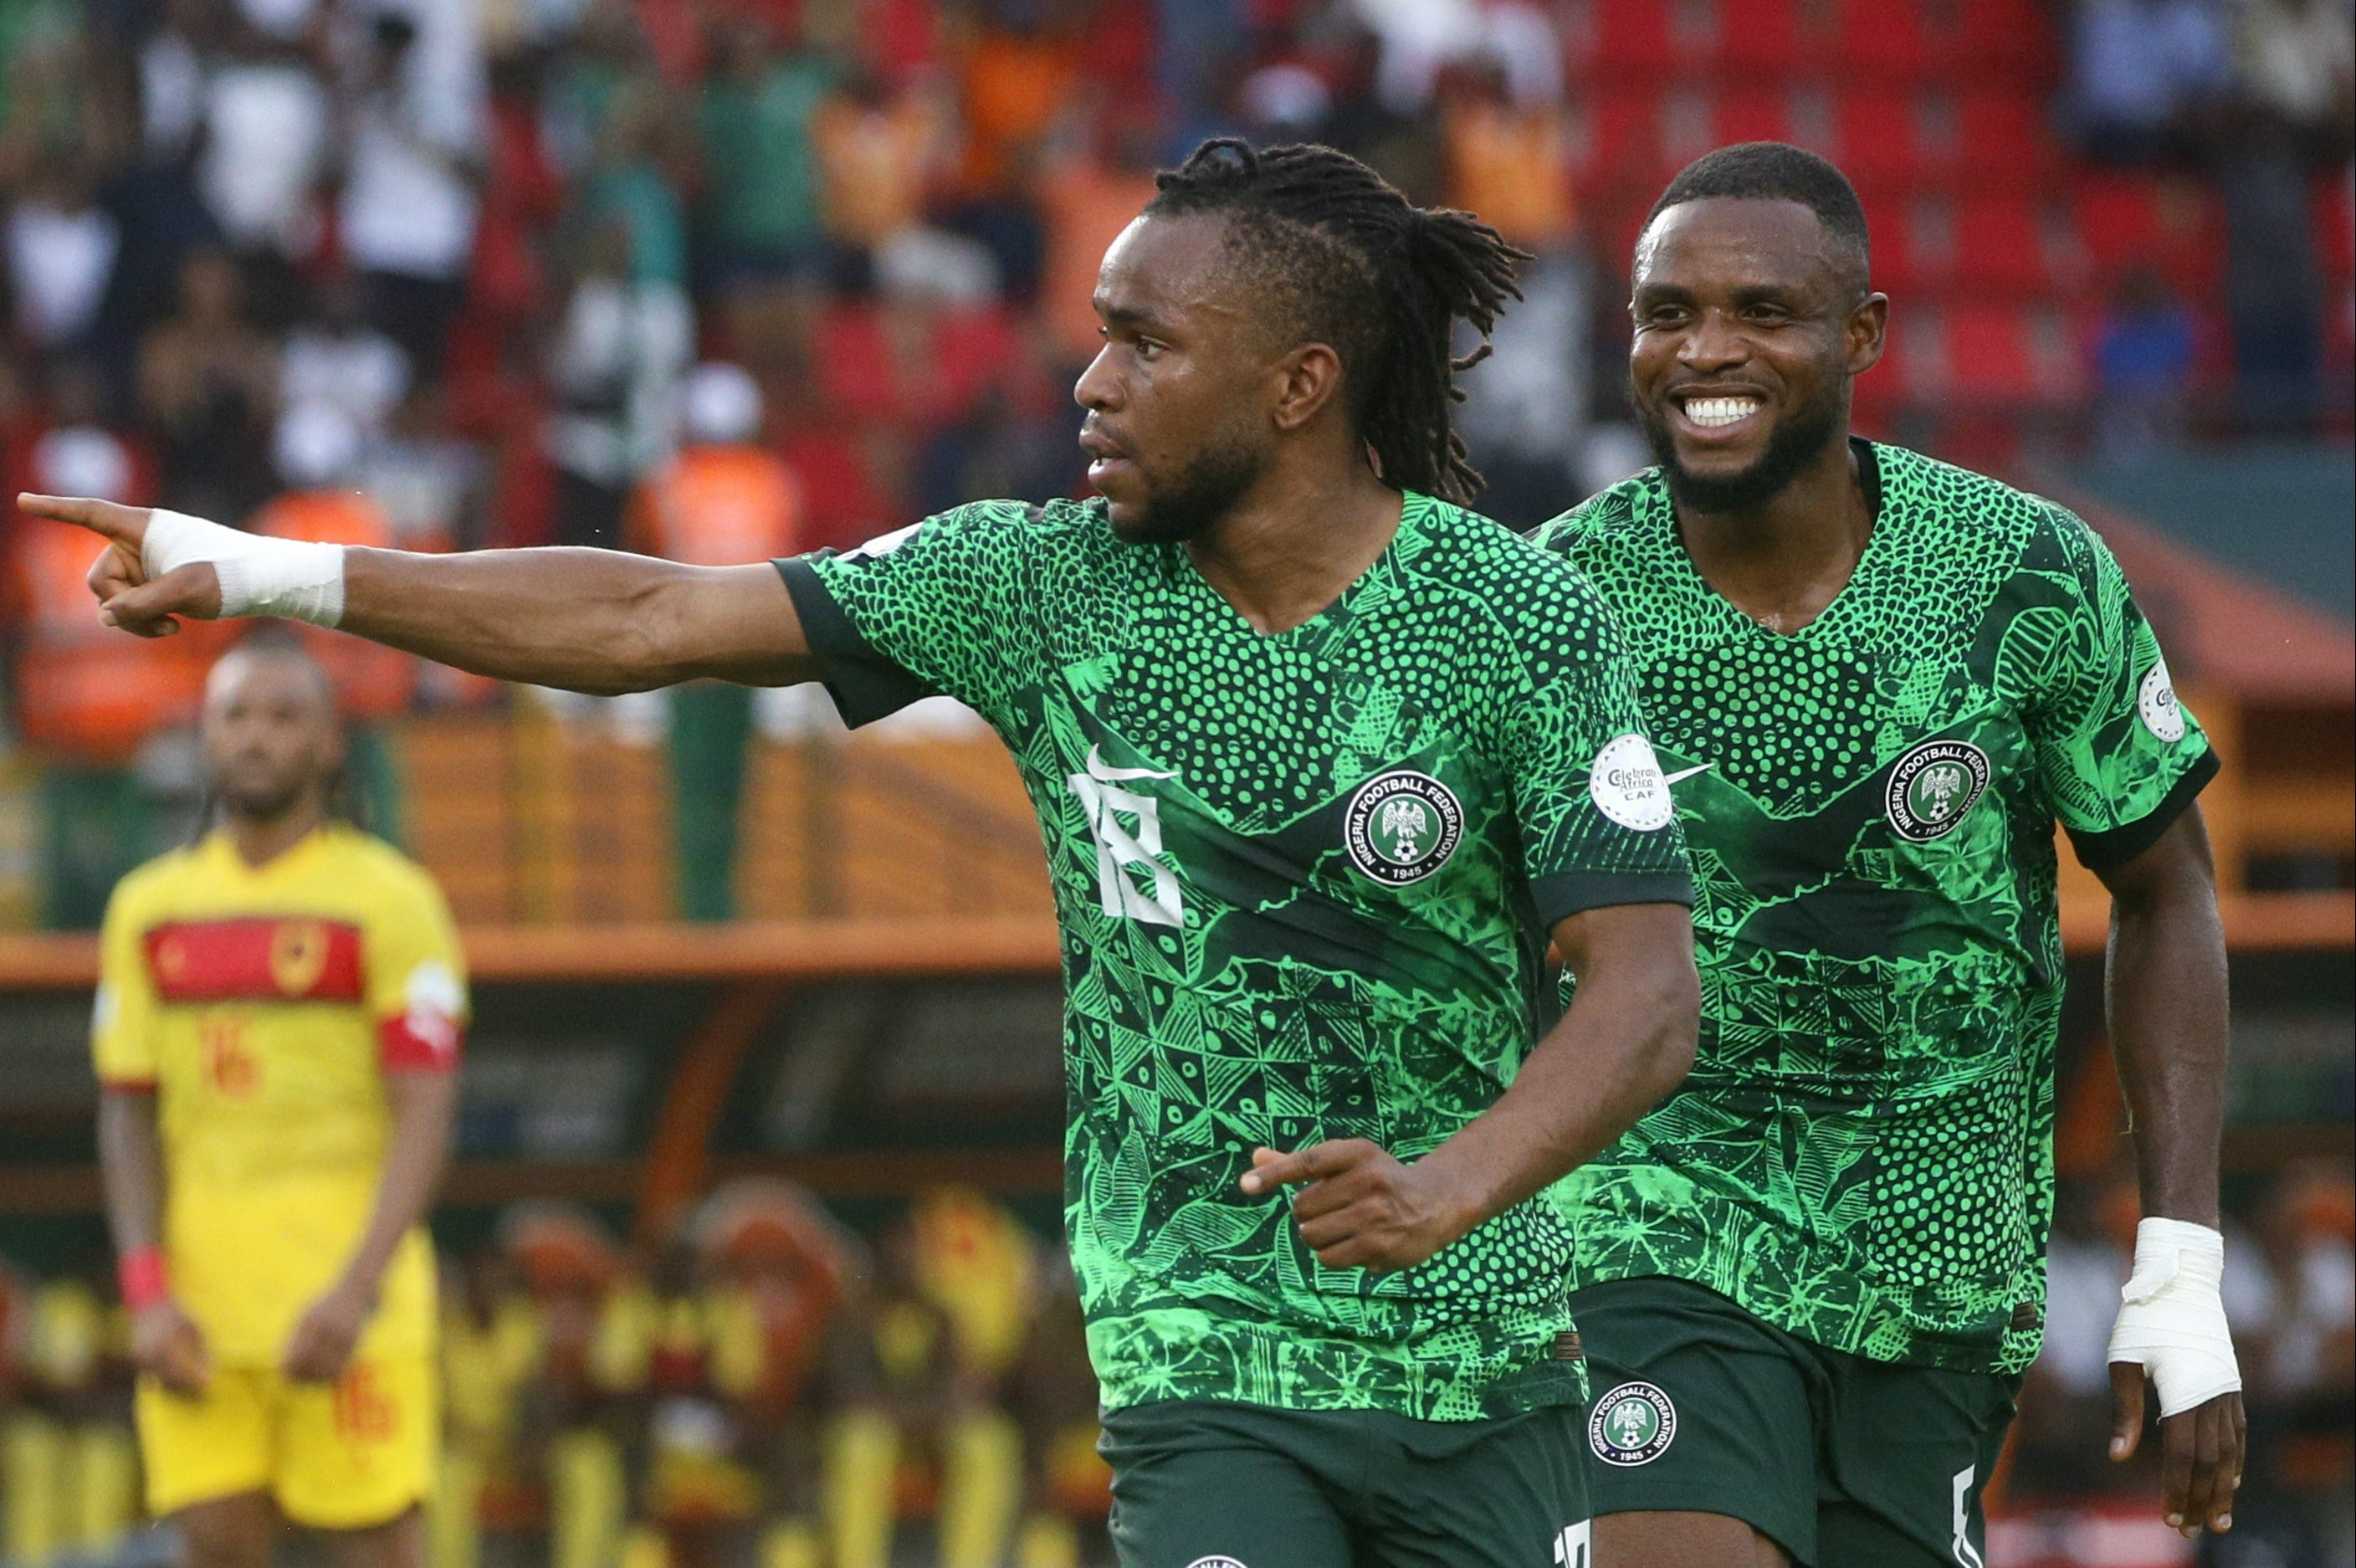 Ademola Lookman’s goal was enough for Nigeria to reach the semi-finals